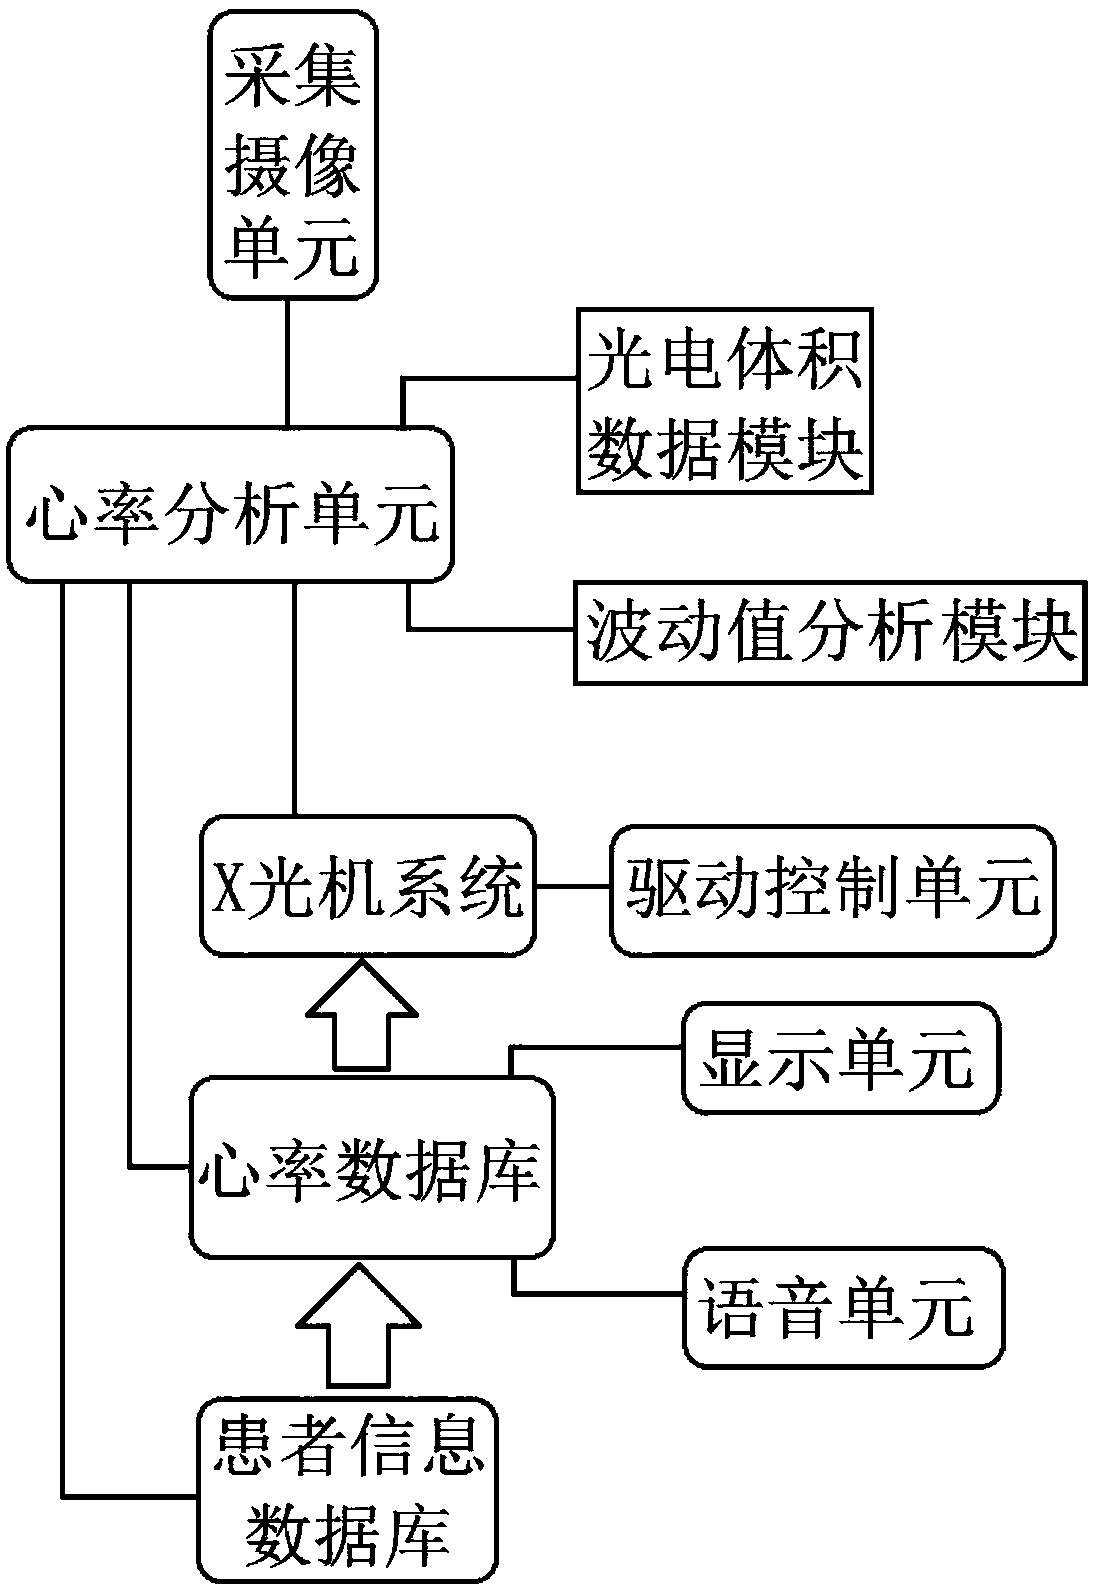 Intelligent X-ray machine facial information acquisition and processing system